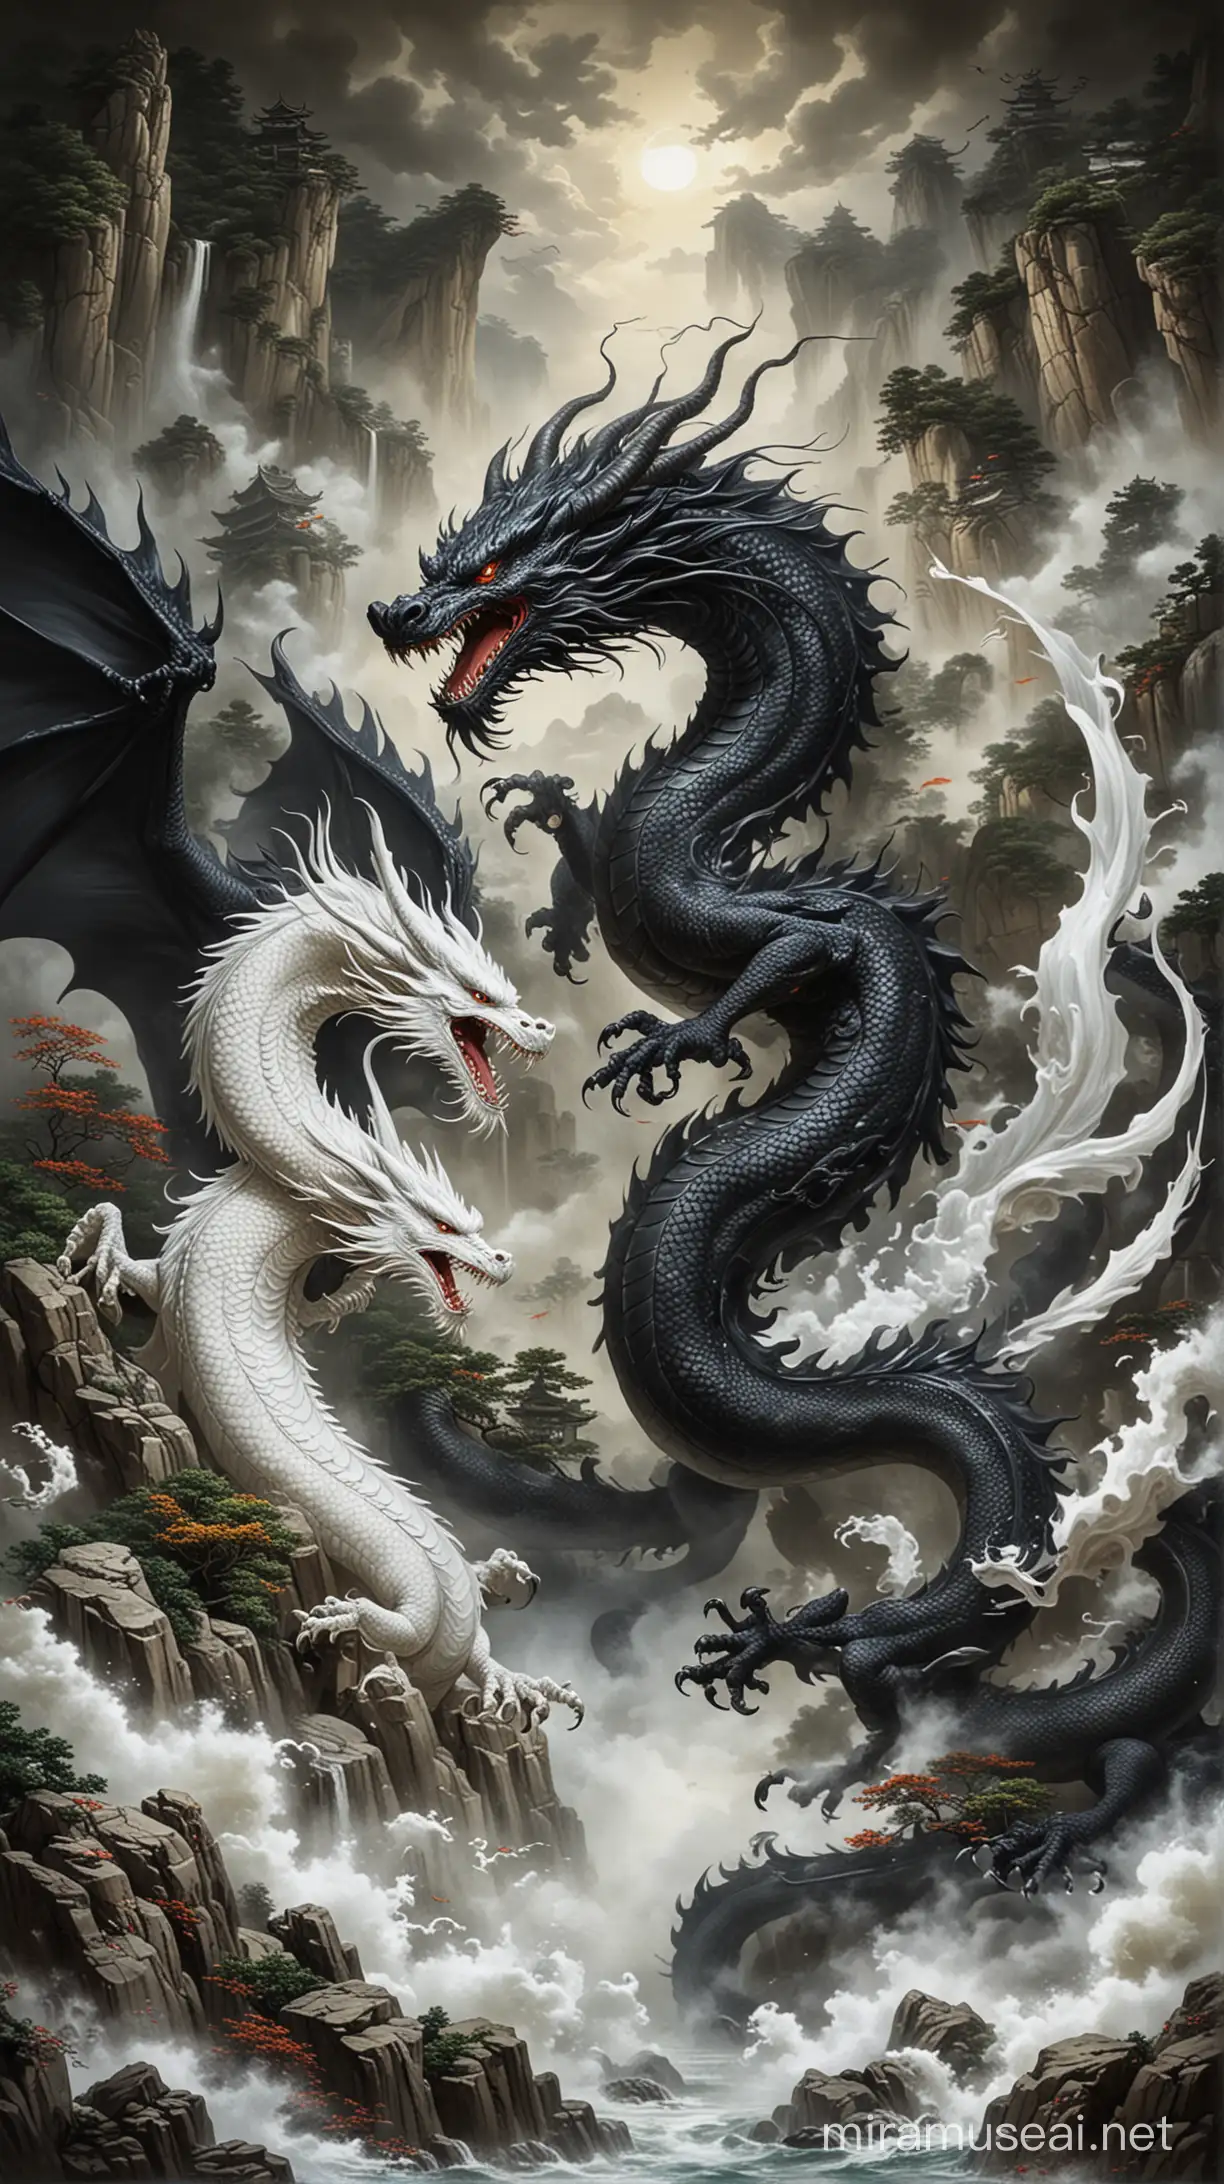 A black dragon is placed at the top of the frame. A kind white dragon is placed at the bottom of the frame. These two dragons are fighting in the center of the picture. Chinese painting